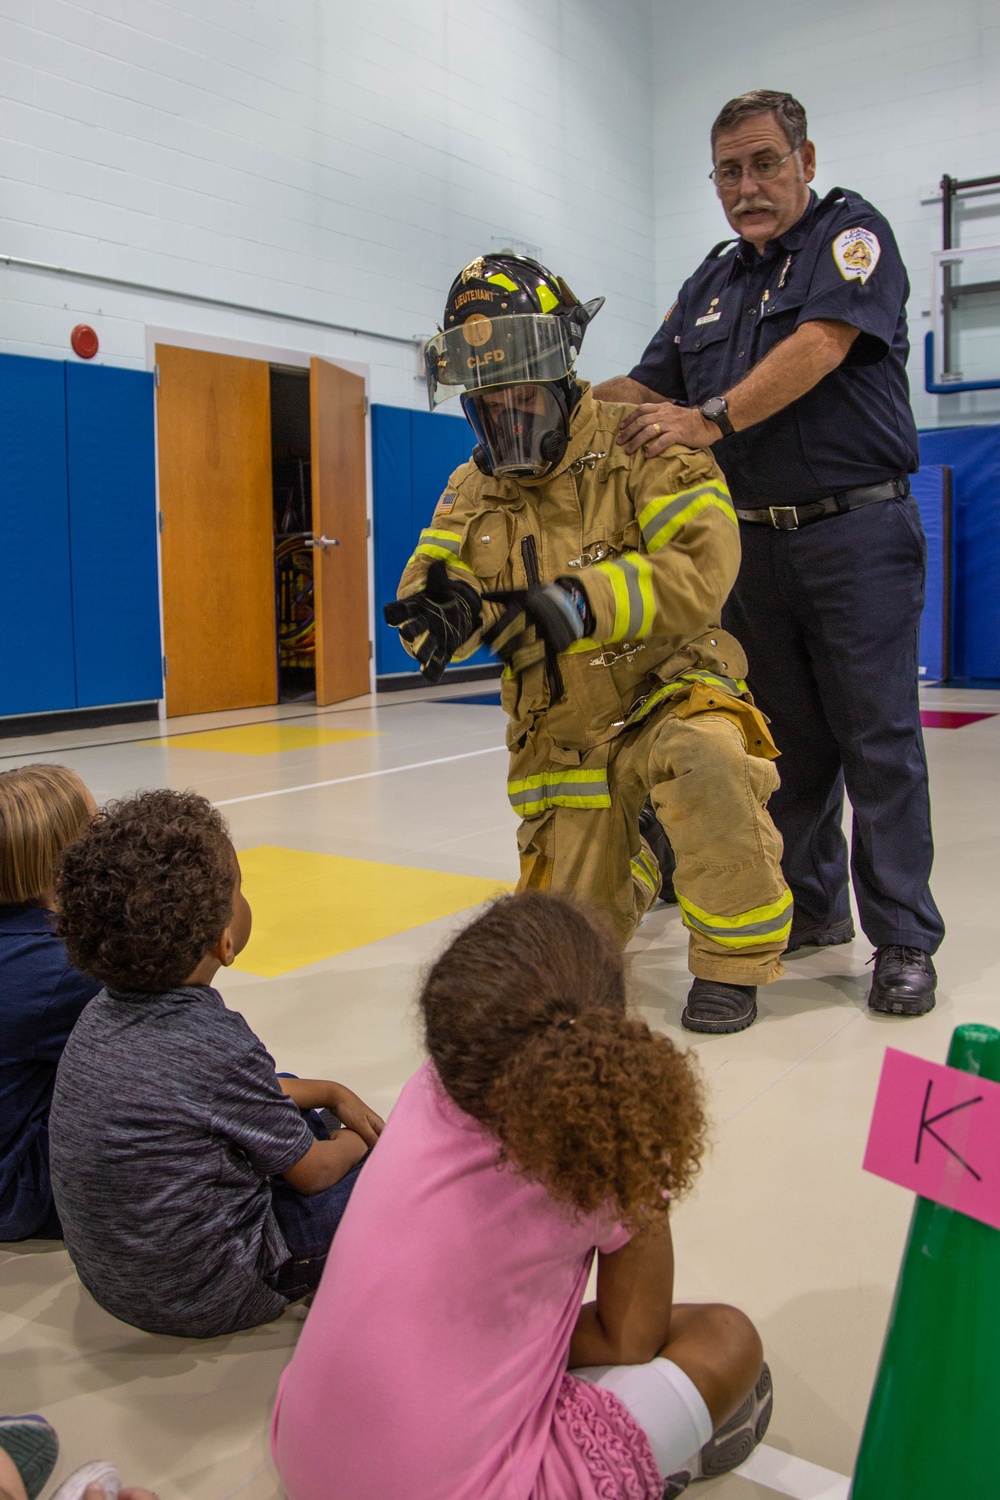 Firefighters teach fire prevention to students through song and dance